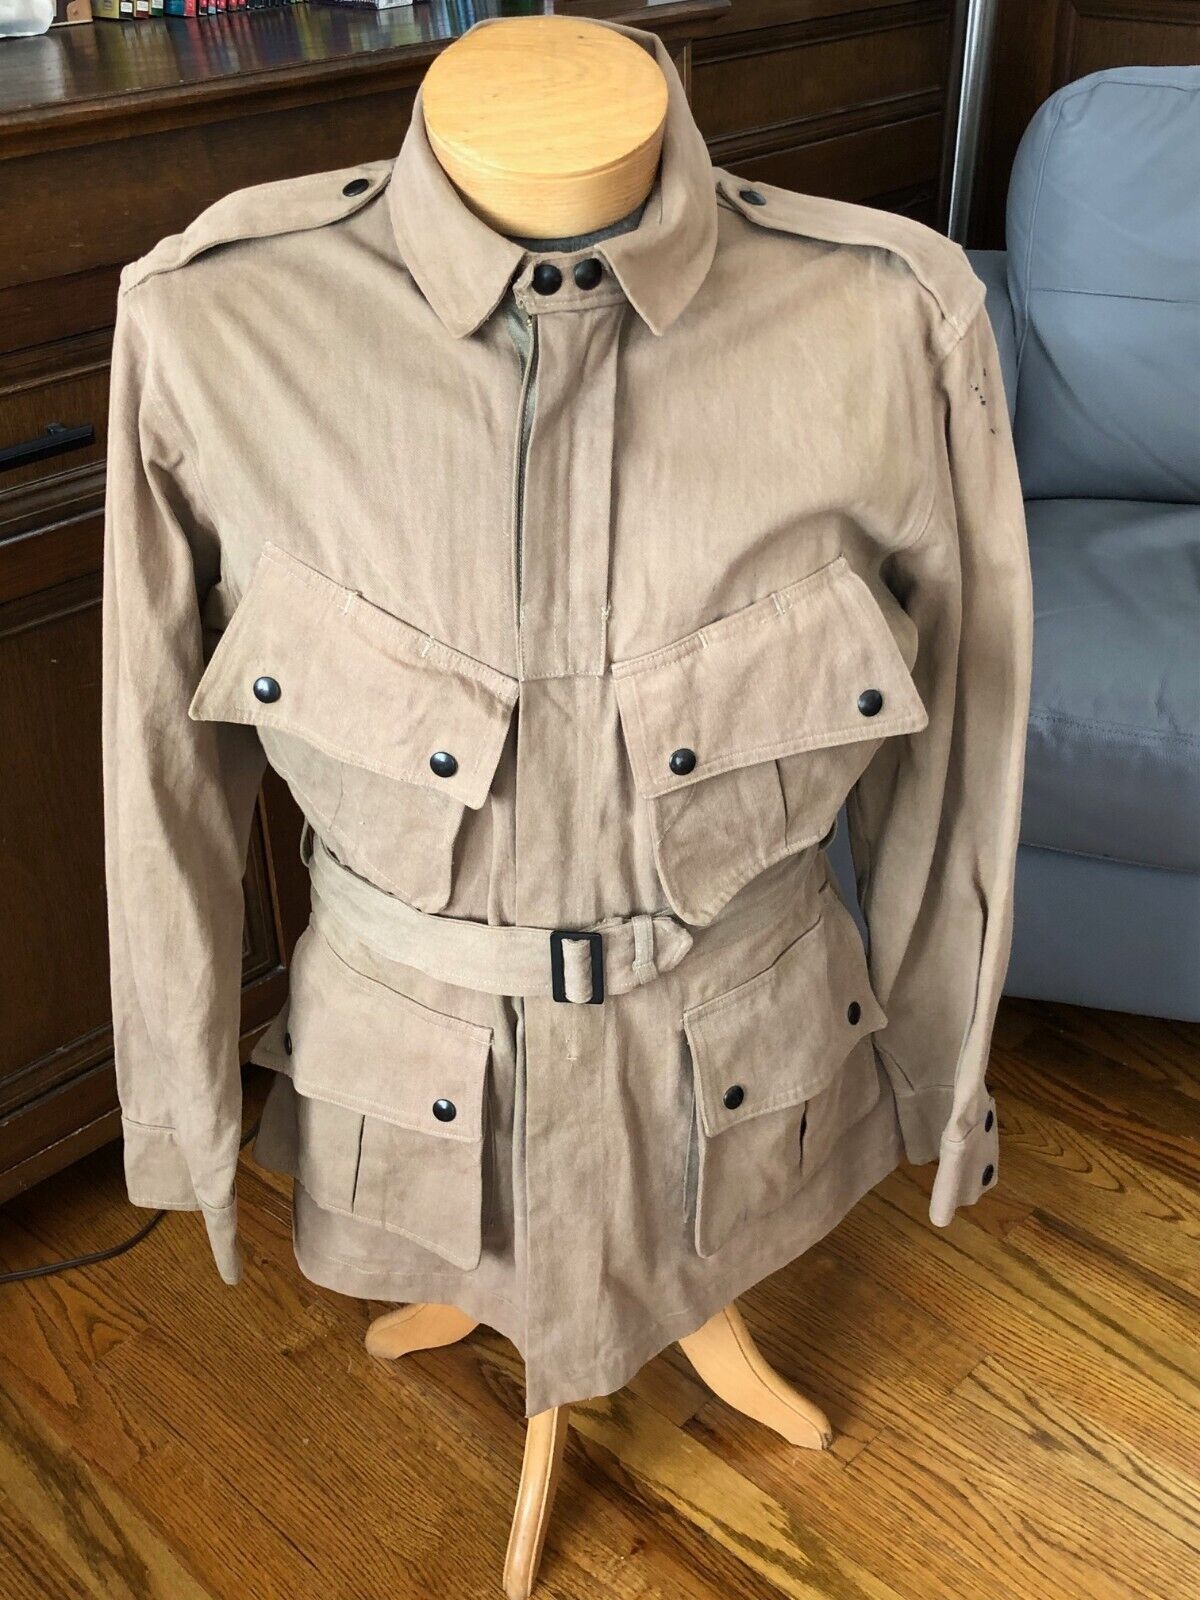 WWII US M1942 M42 Airborne Paratrooper Officer Tunic Uniform Jacket old contract